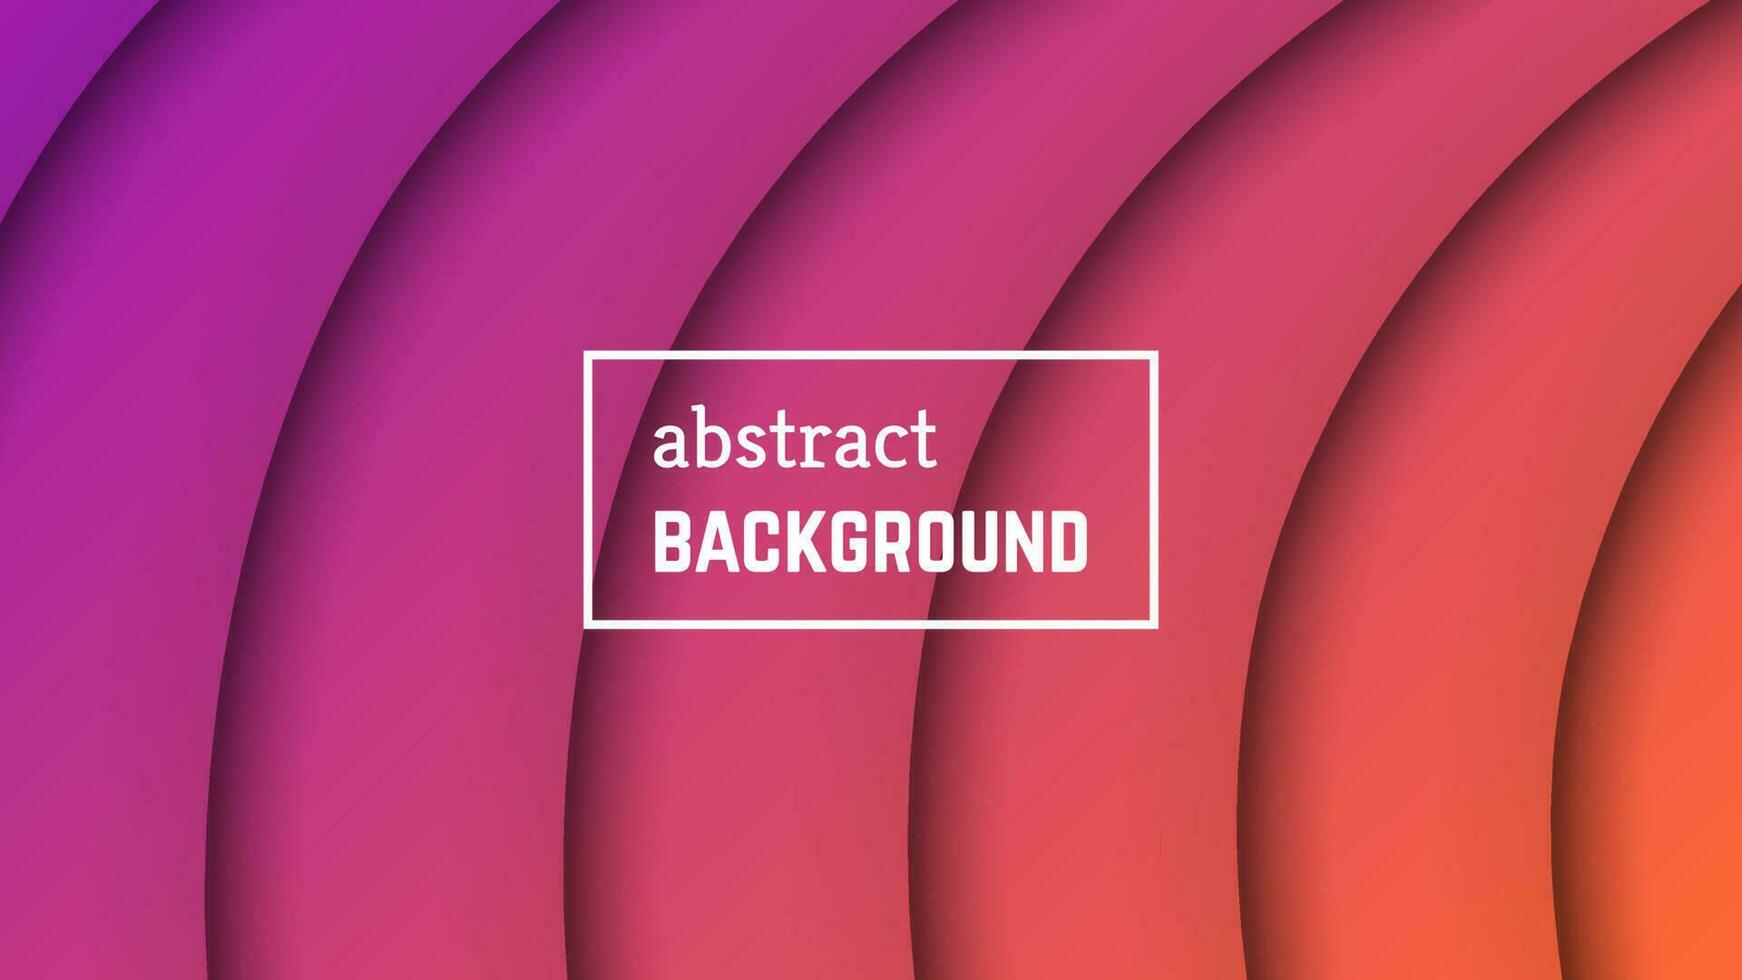 Abstract minimal line geometric background. Purple line layer shape for banner, templates, cards. Vector illustration.